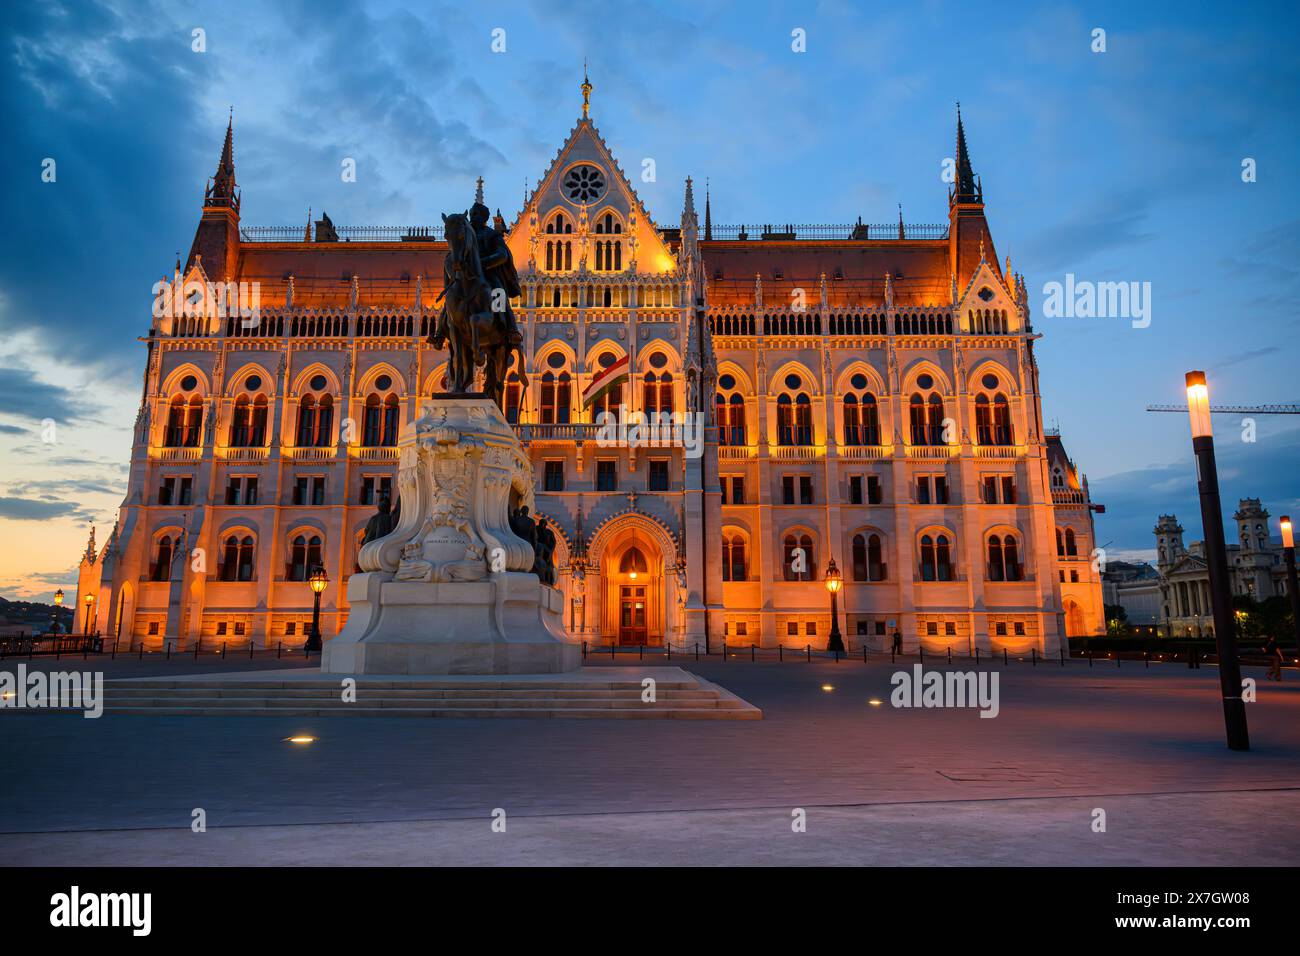 Close up images of  the illuminated Hungarian Parliament Building at dusk, Budapest, Hungary Stock Photo